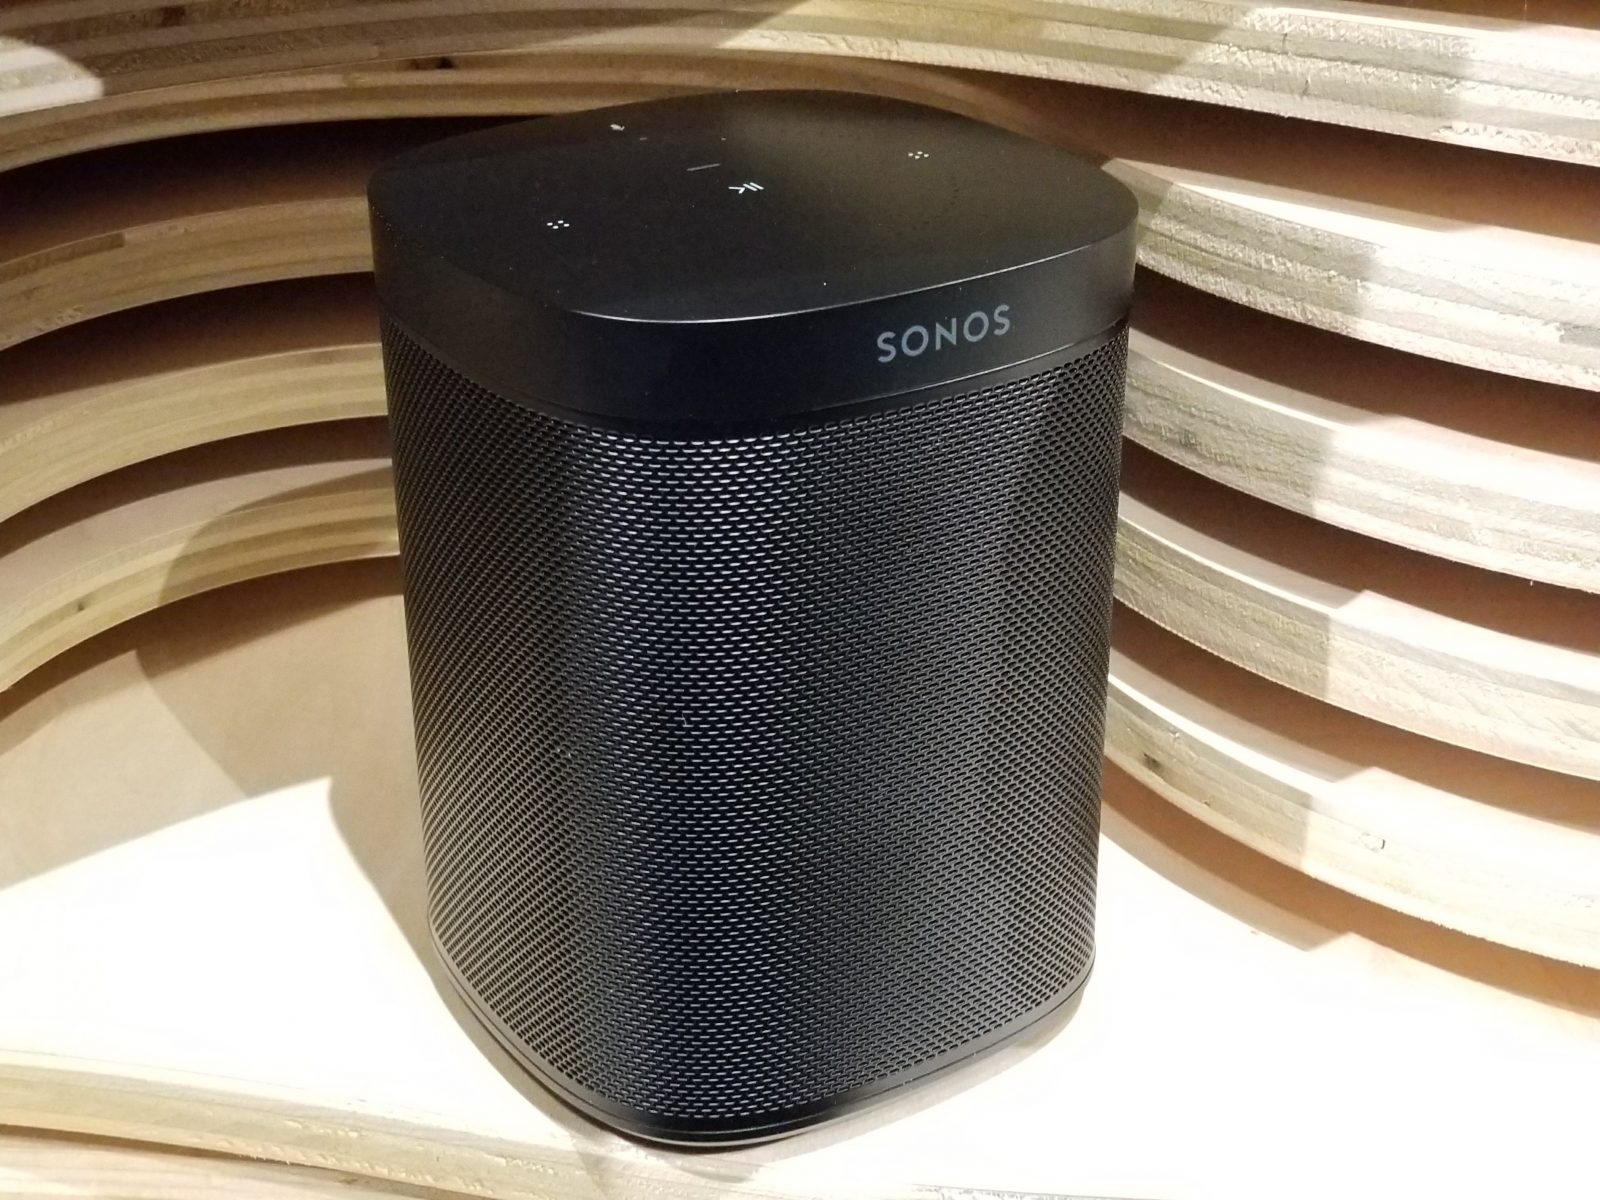 One Smart Review - Sonos Sound and Amazon Alexa Make a Great Duo -